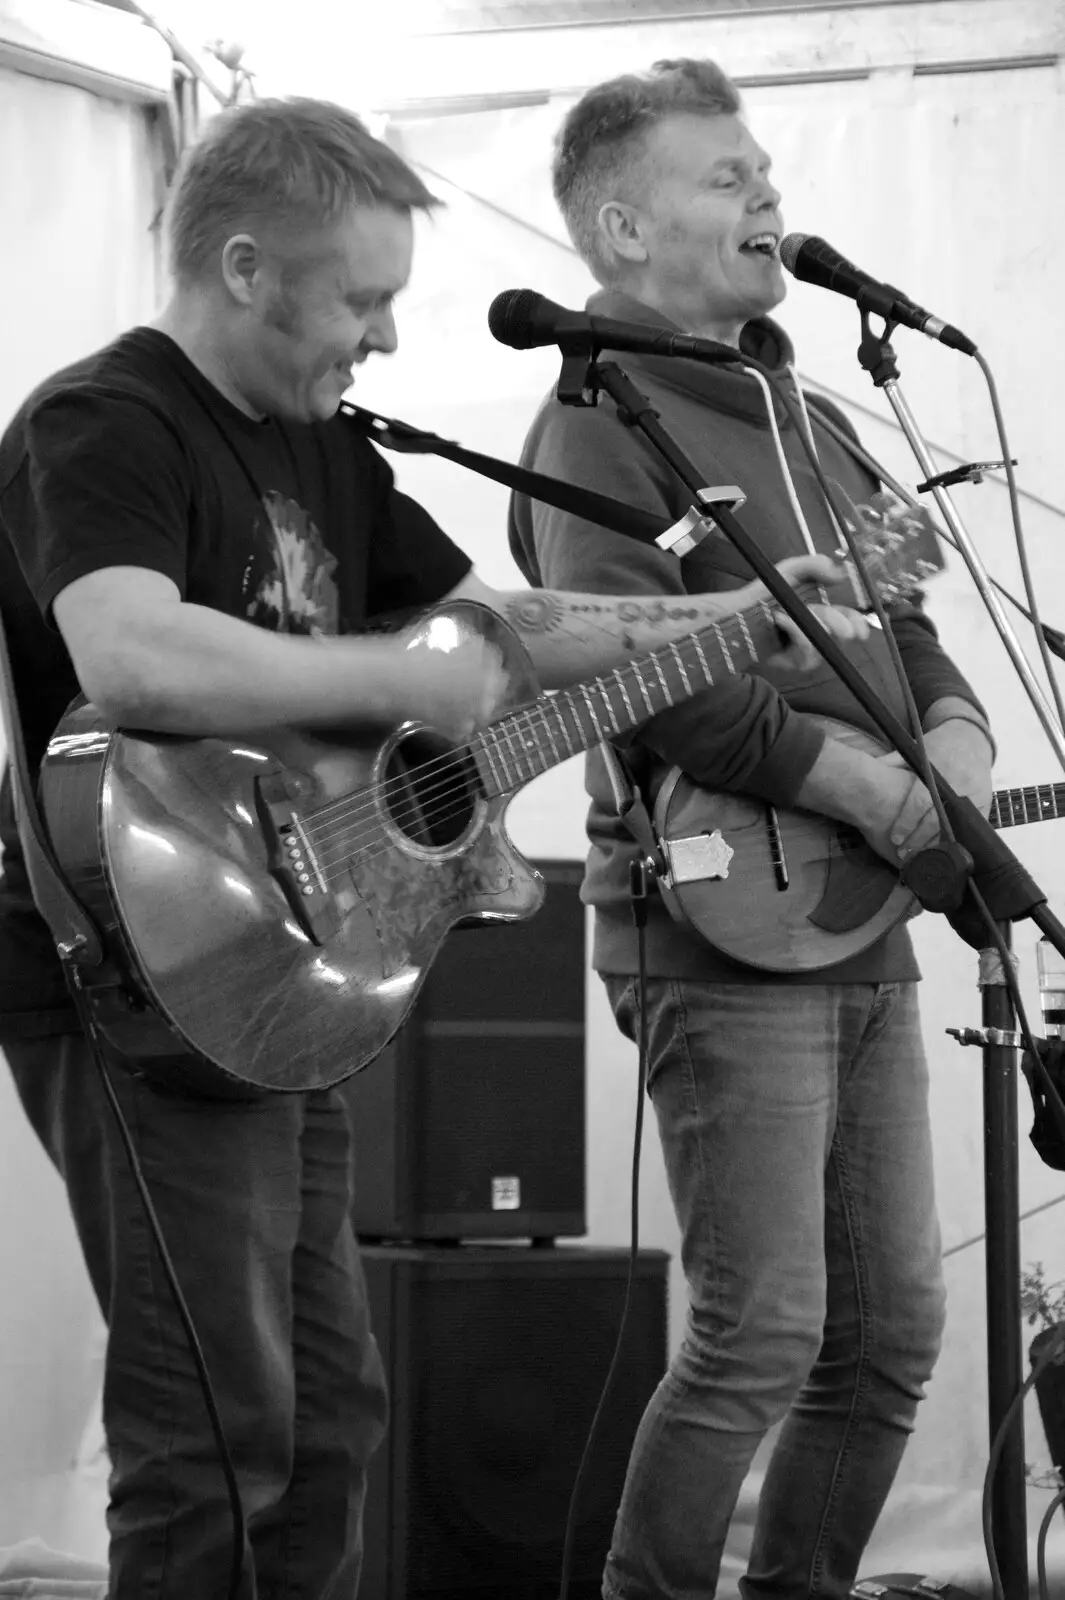 Liam and Ian, from The Star Wing Winter Beer Fest, Redgrave, Suffolk - 31st January 2020